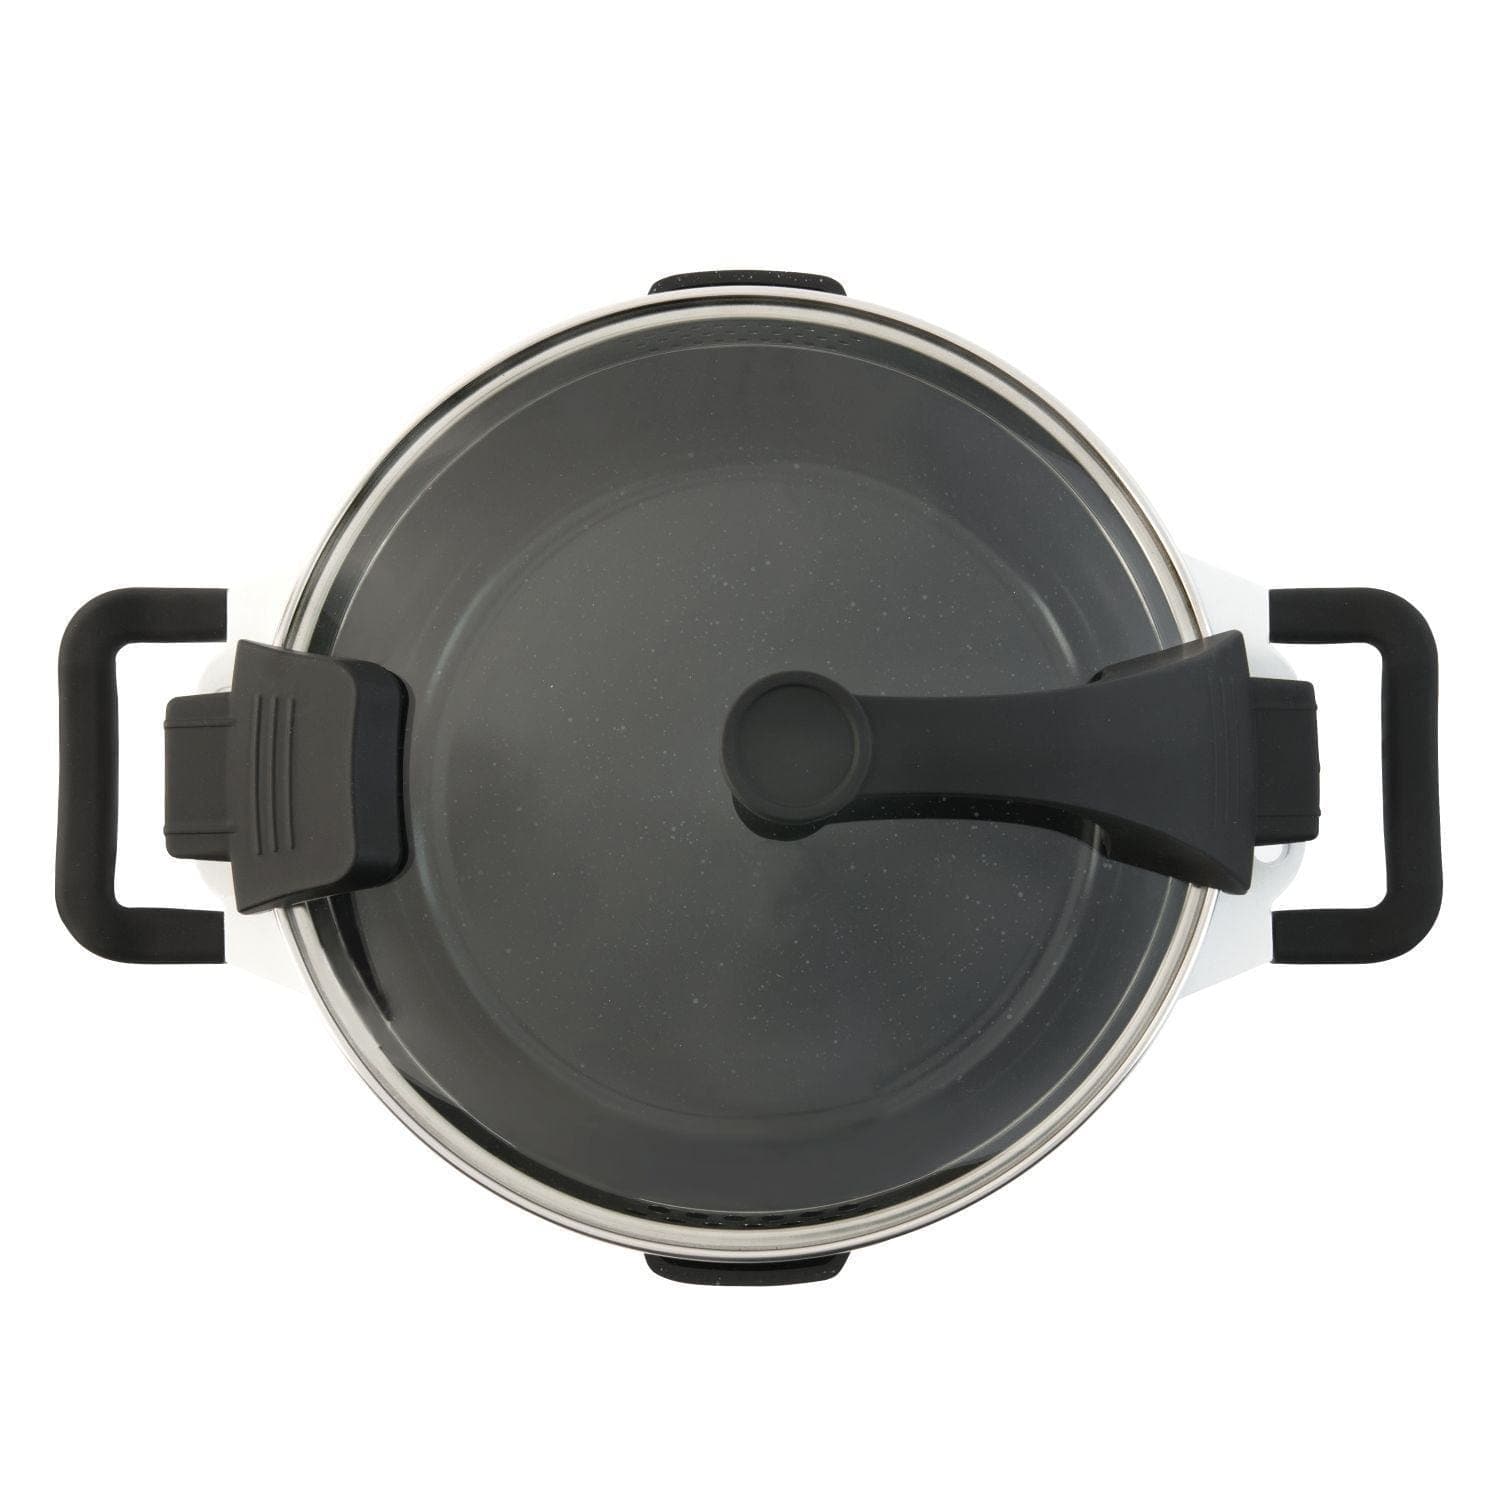 BergHOFF Virgo 2-Handle Deep Skillet with Cover - White, 28 cm - 2304919 - Jashanmal Home